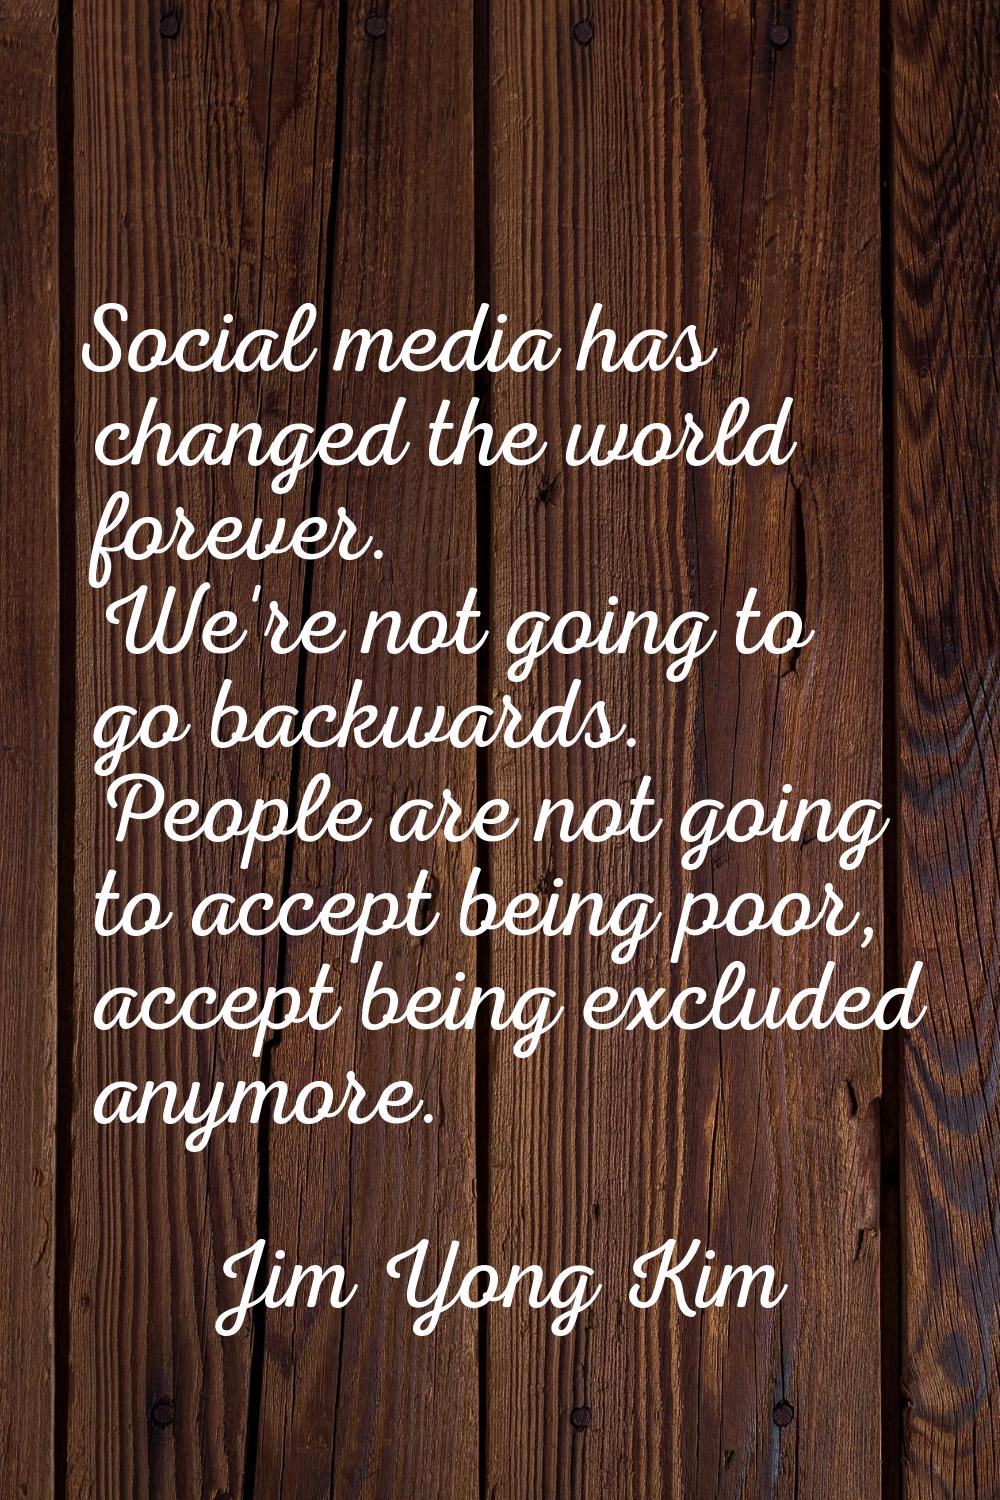 Social media has changed the world forever. We're not going to go backwards. People are not going t